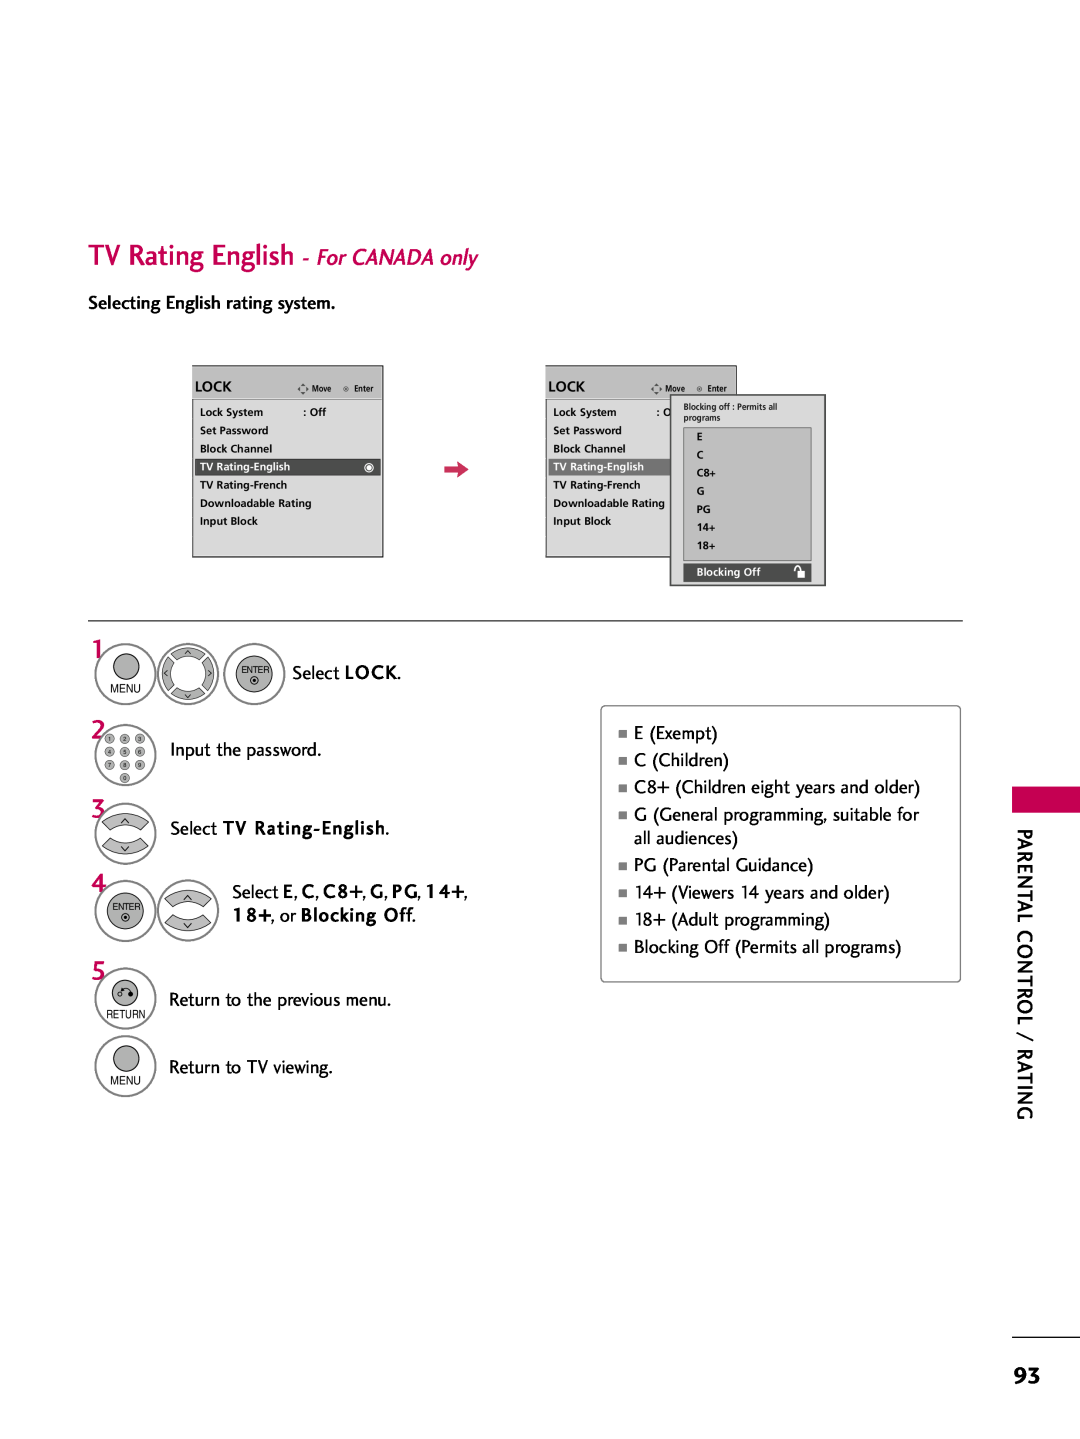 LG Electronics 50PQ12, 42PQ12 owner manual TV Rating English - For CANADA only, Select E, C, C8+, G, PG, 14+ 